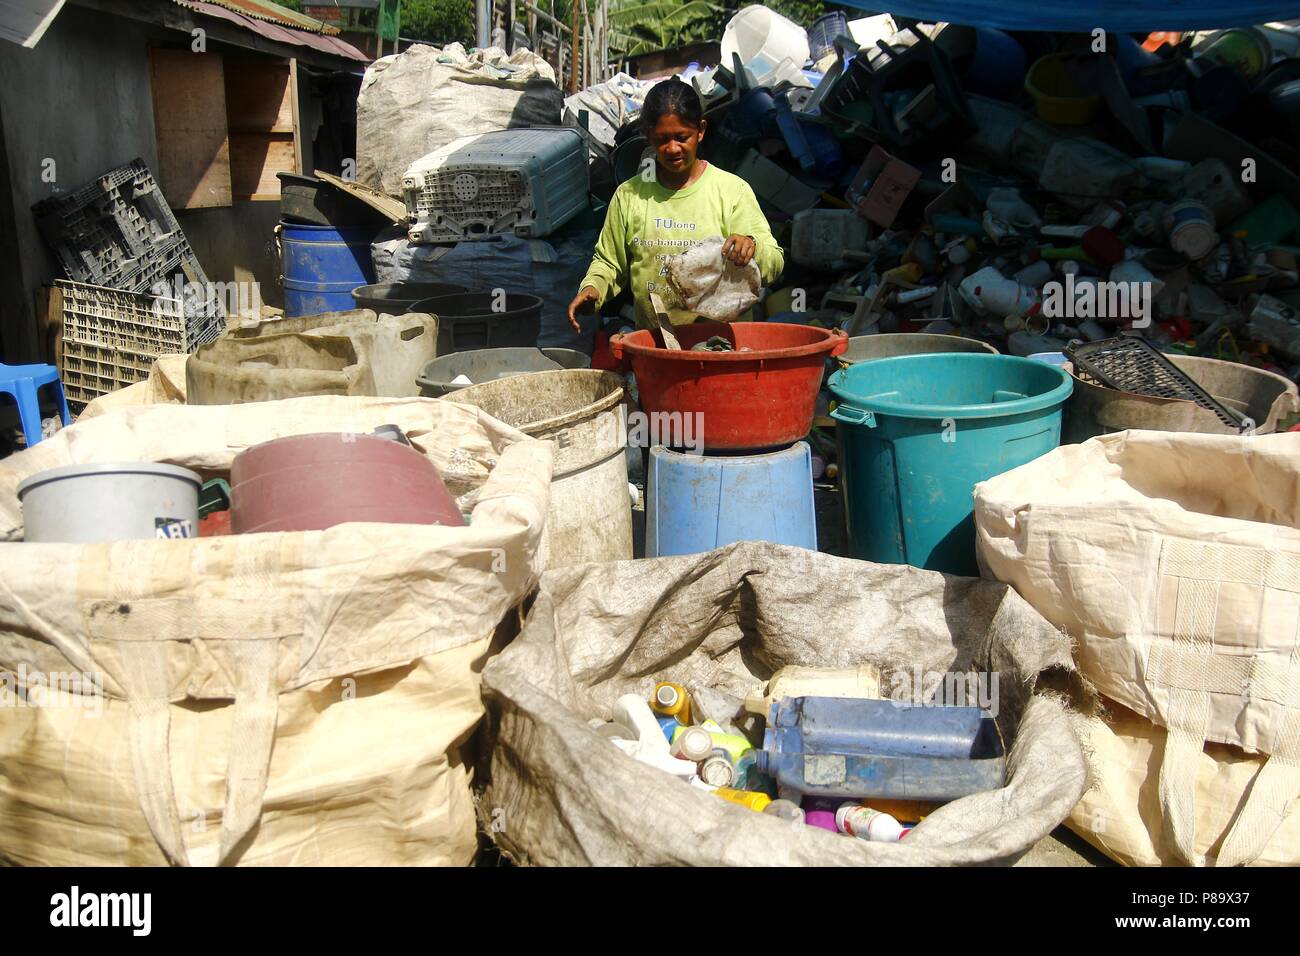 ANGONO, RIZAL, PHILIPPINES - JULY 4 2018: Workers of a materials recovery facility sort through plastic waste and segregate them for proper recycling. Stock Photo